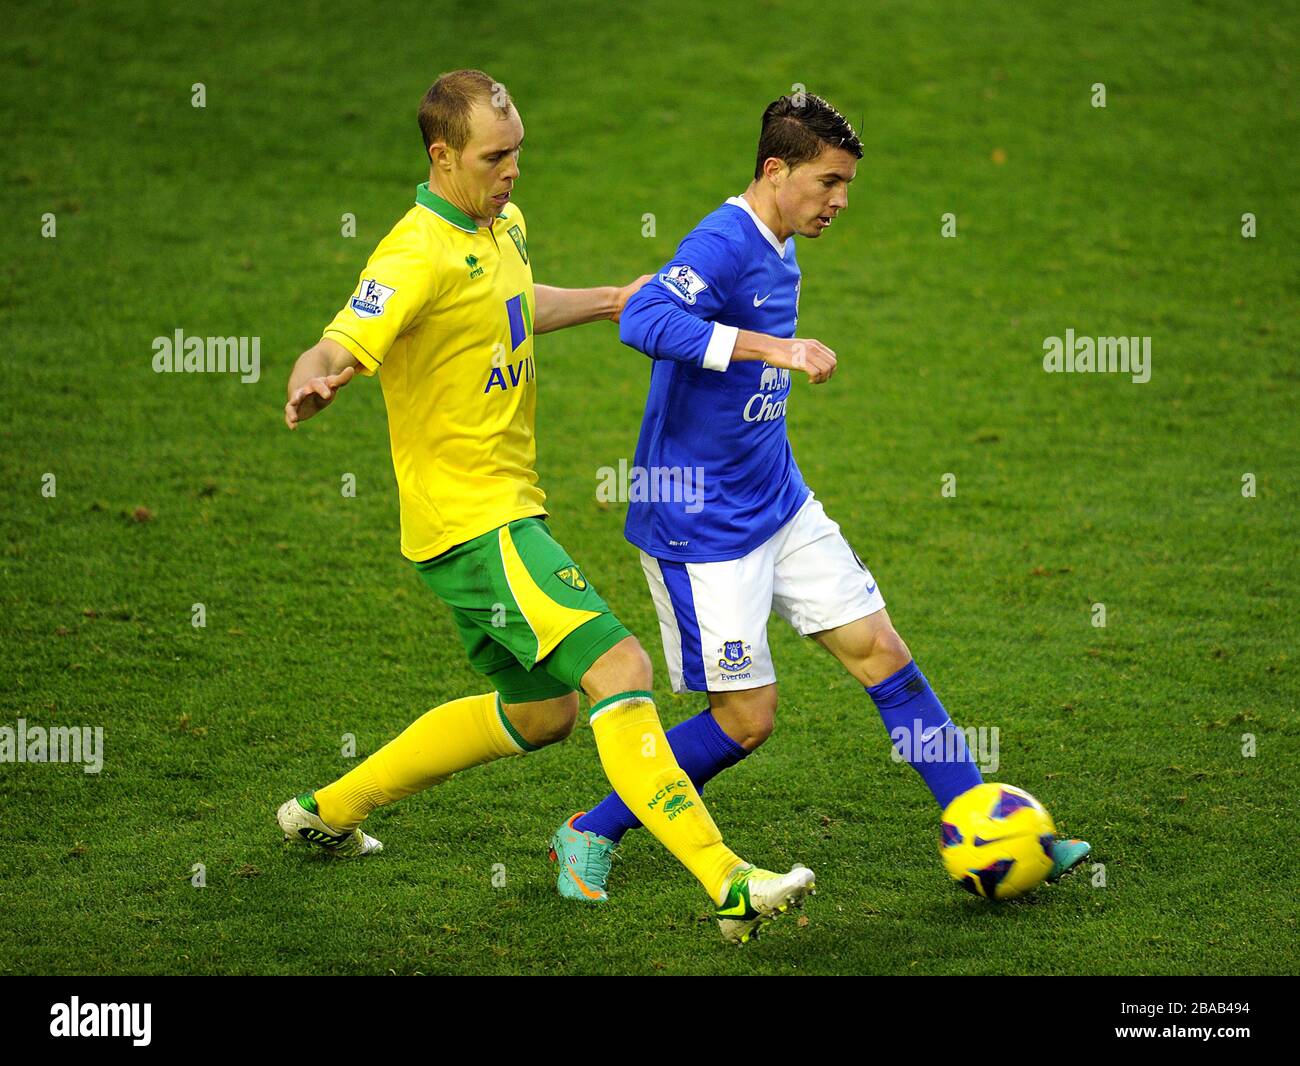 Norwich City's Steven Whittaker (left) and Everton's Bryan Oviedo battle for the ball Stock Photo